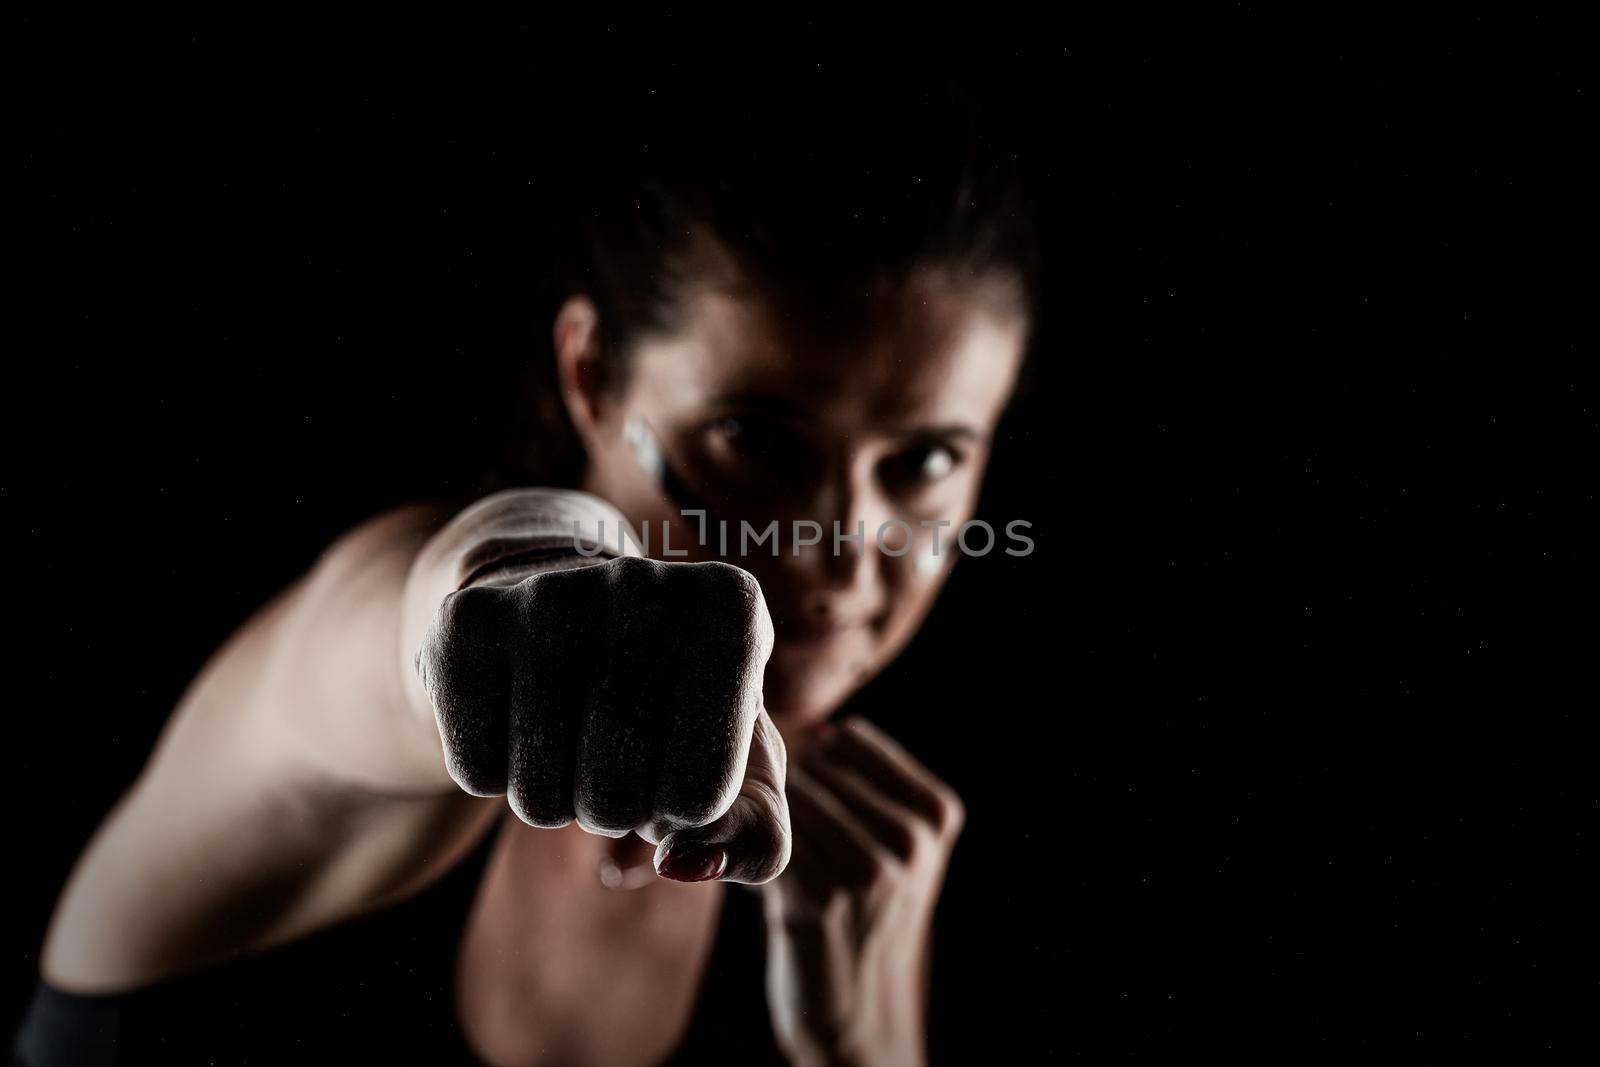 Kickboxer kirl with magnesium powder on her hands punching with dust visible.